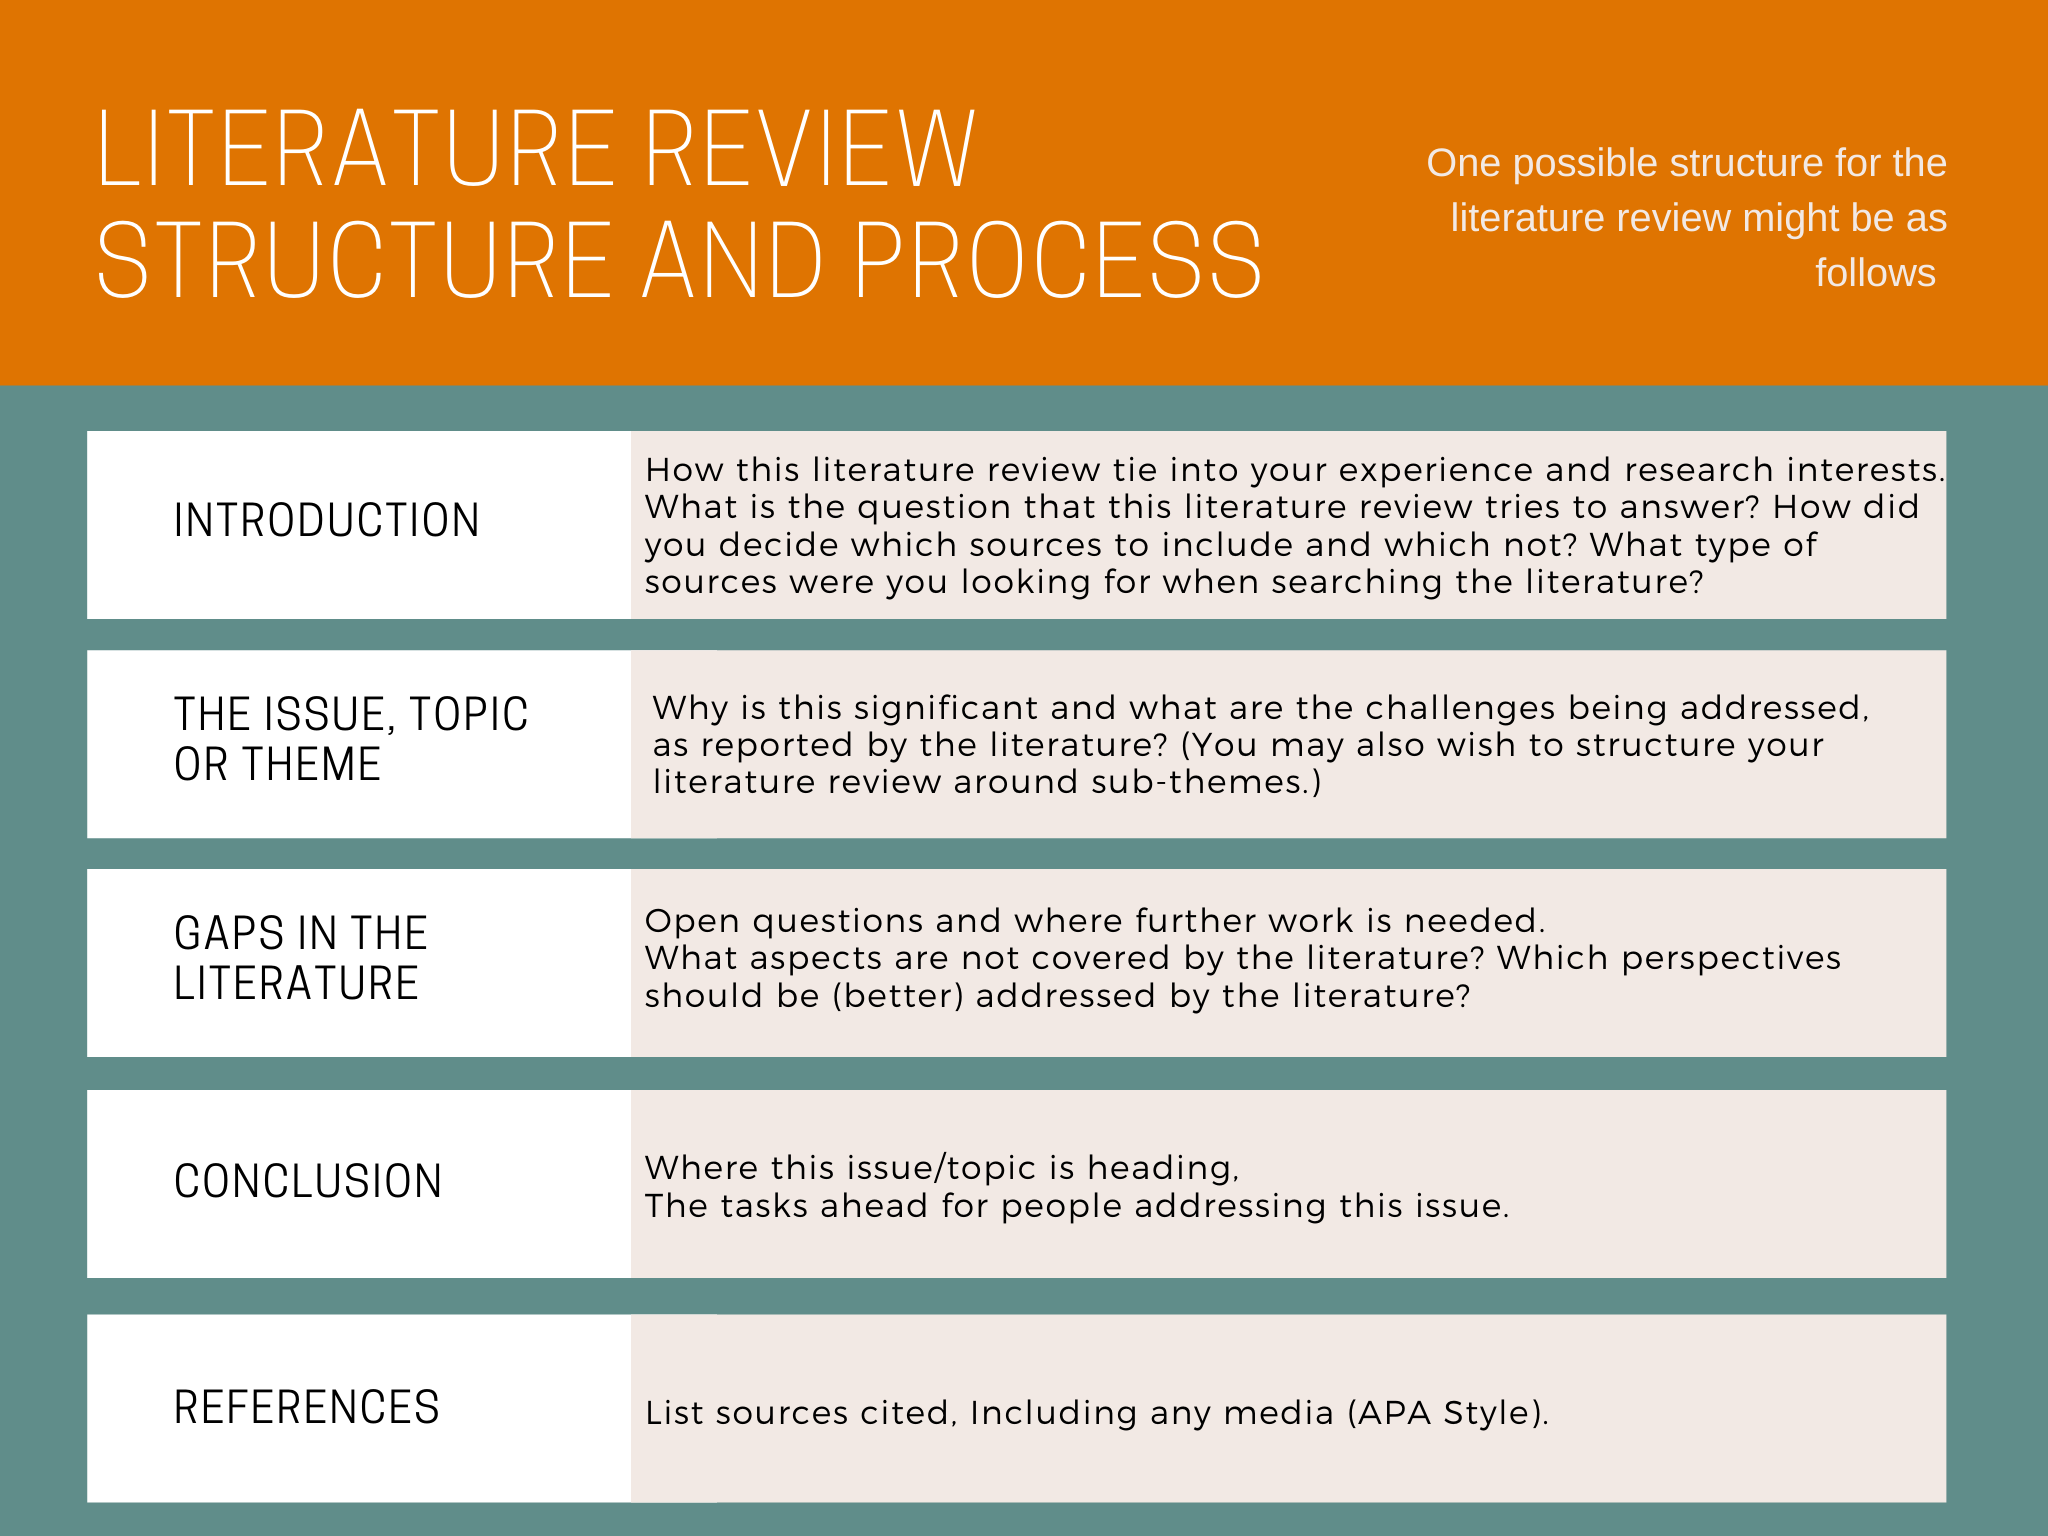 the 5 c's of literature review